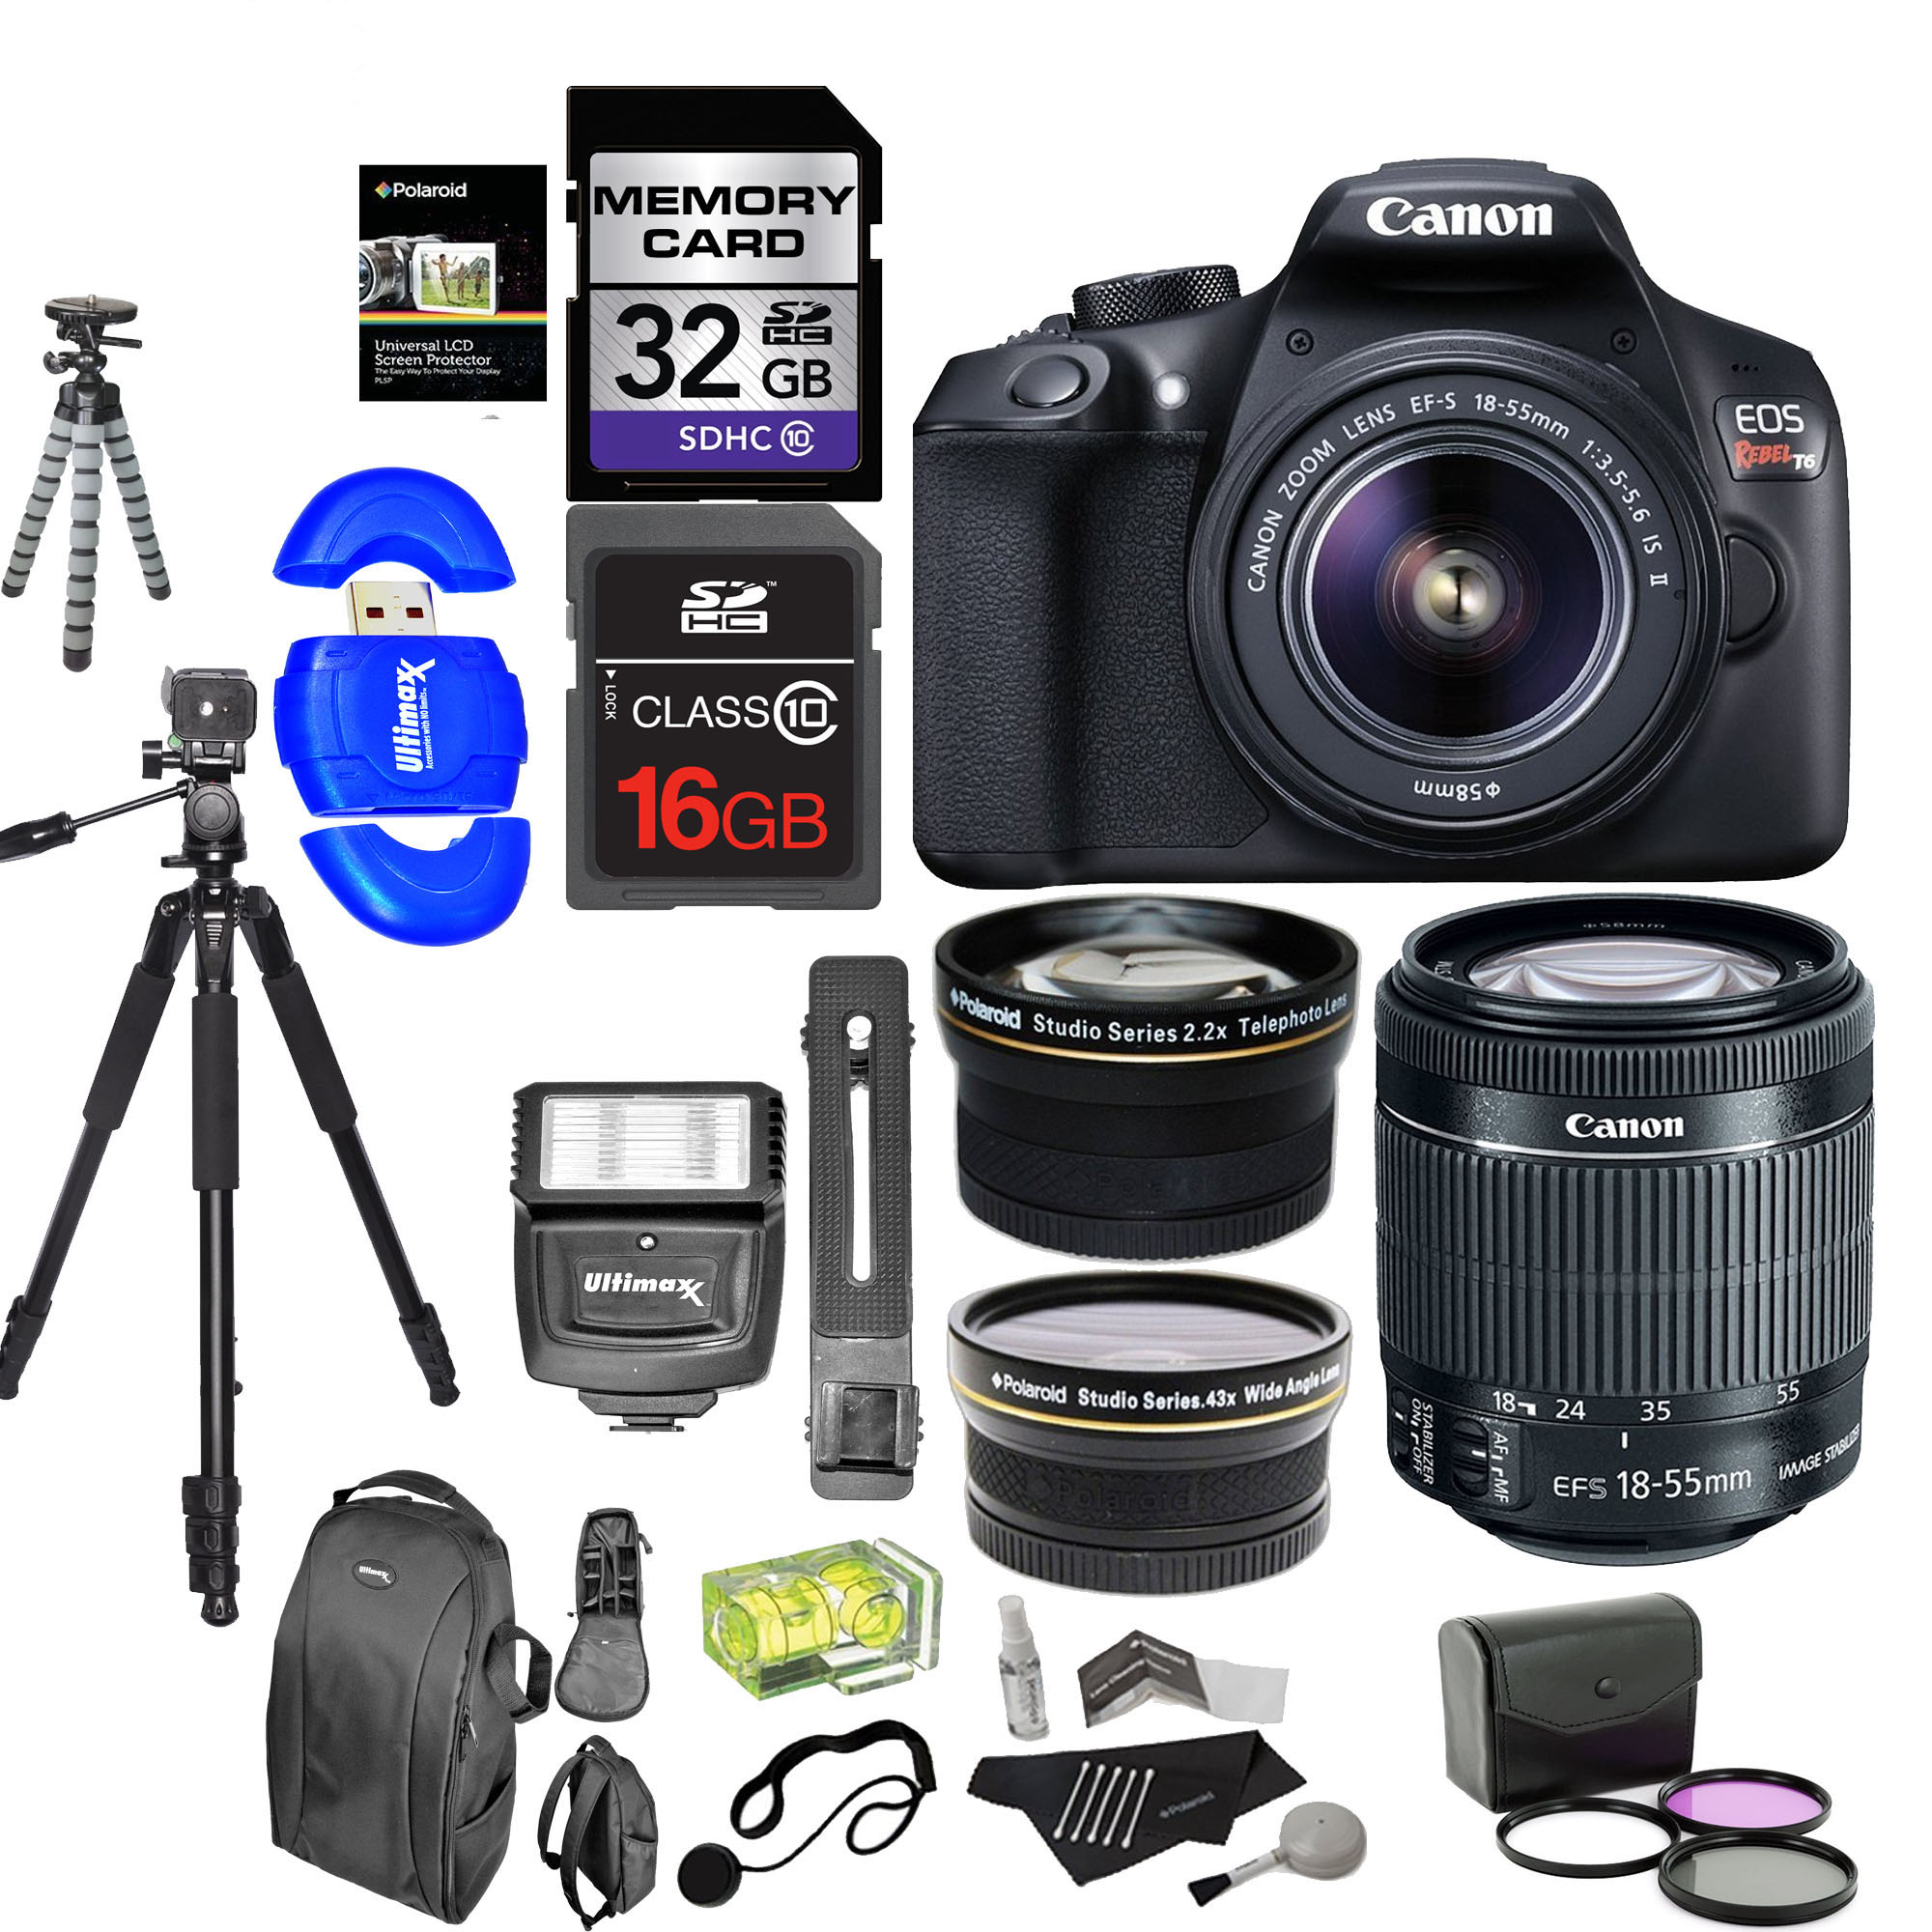 Canon EOS Rebel T6 Digital SLR Camera Kit with EF-S 18-55mm f/3.5-5.6 IS II Lens + Polaroid .43x Super Wide Angle & 2.2X HD Telephoto Lens + 50" & 8" Polaroid Tripods + Memory Cards + Accessory Bundle - image 1 of 7